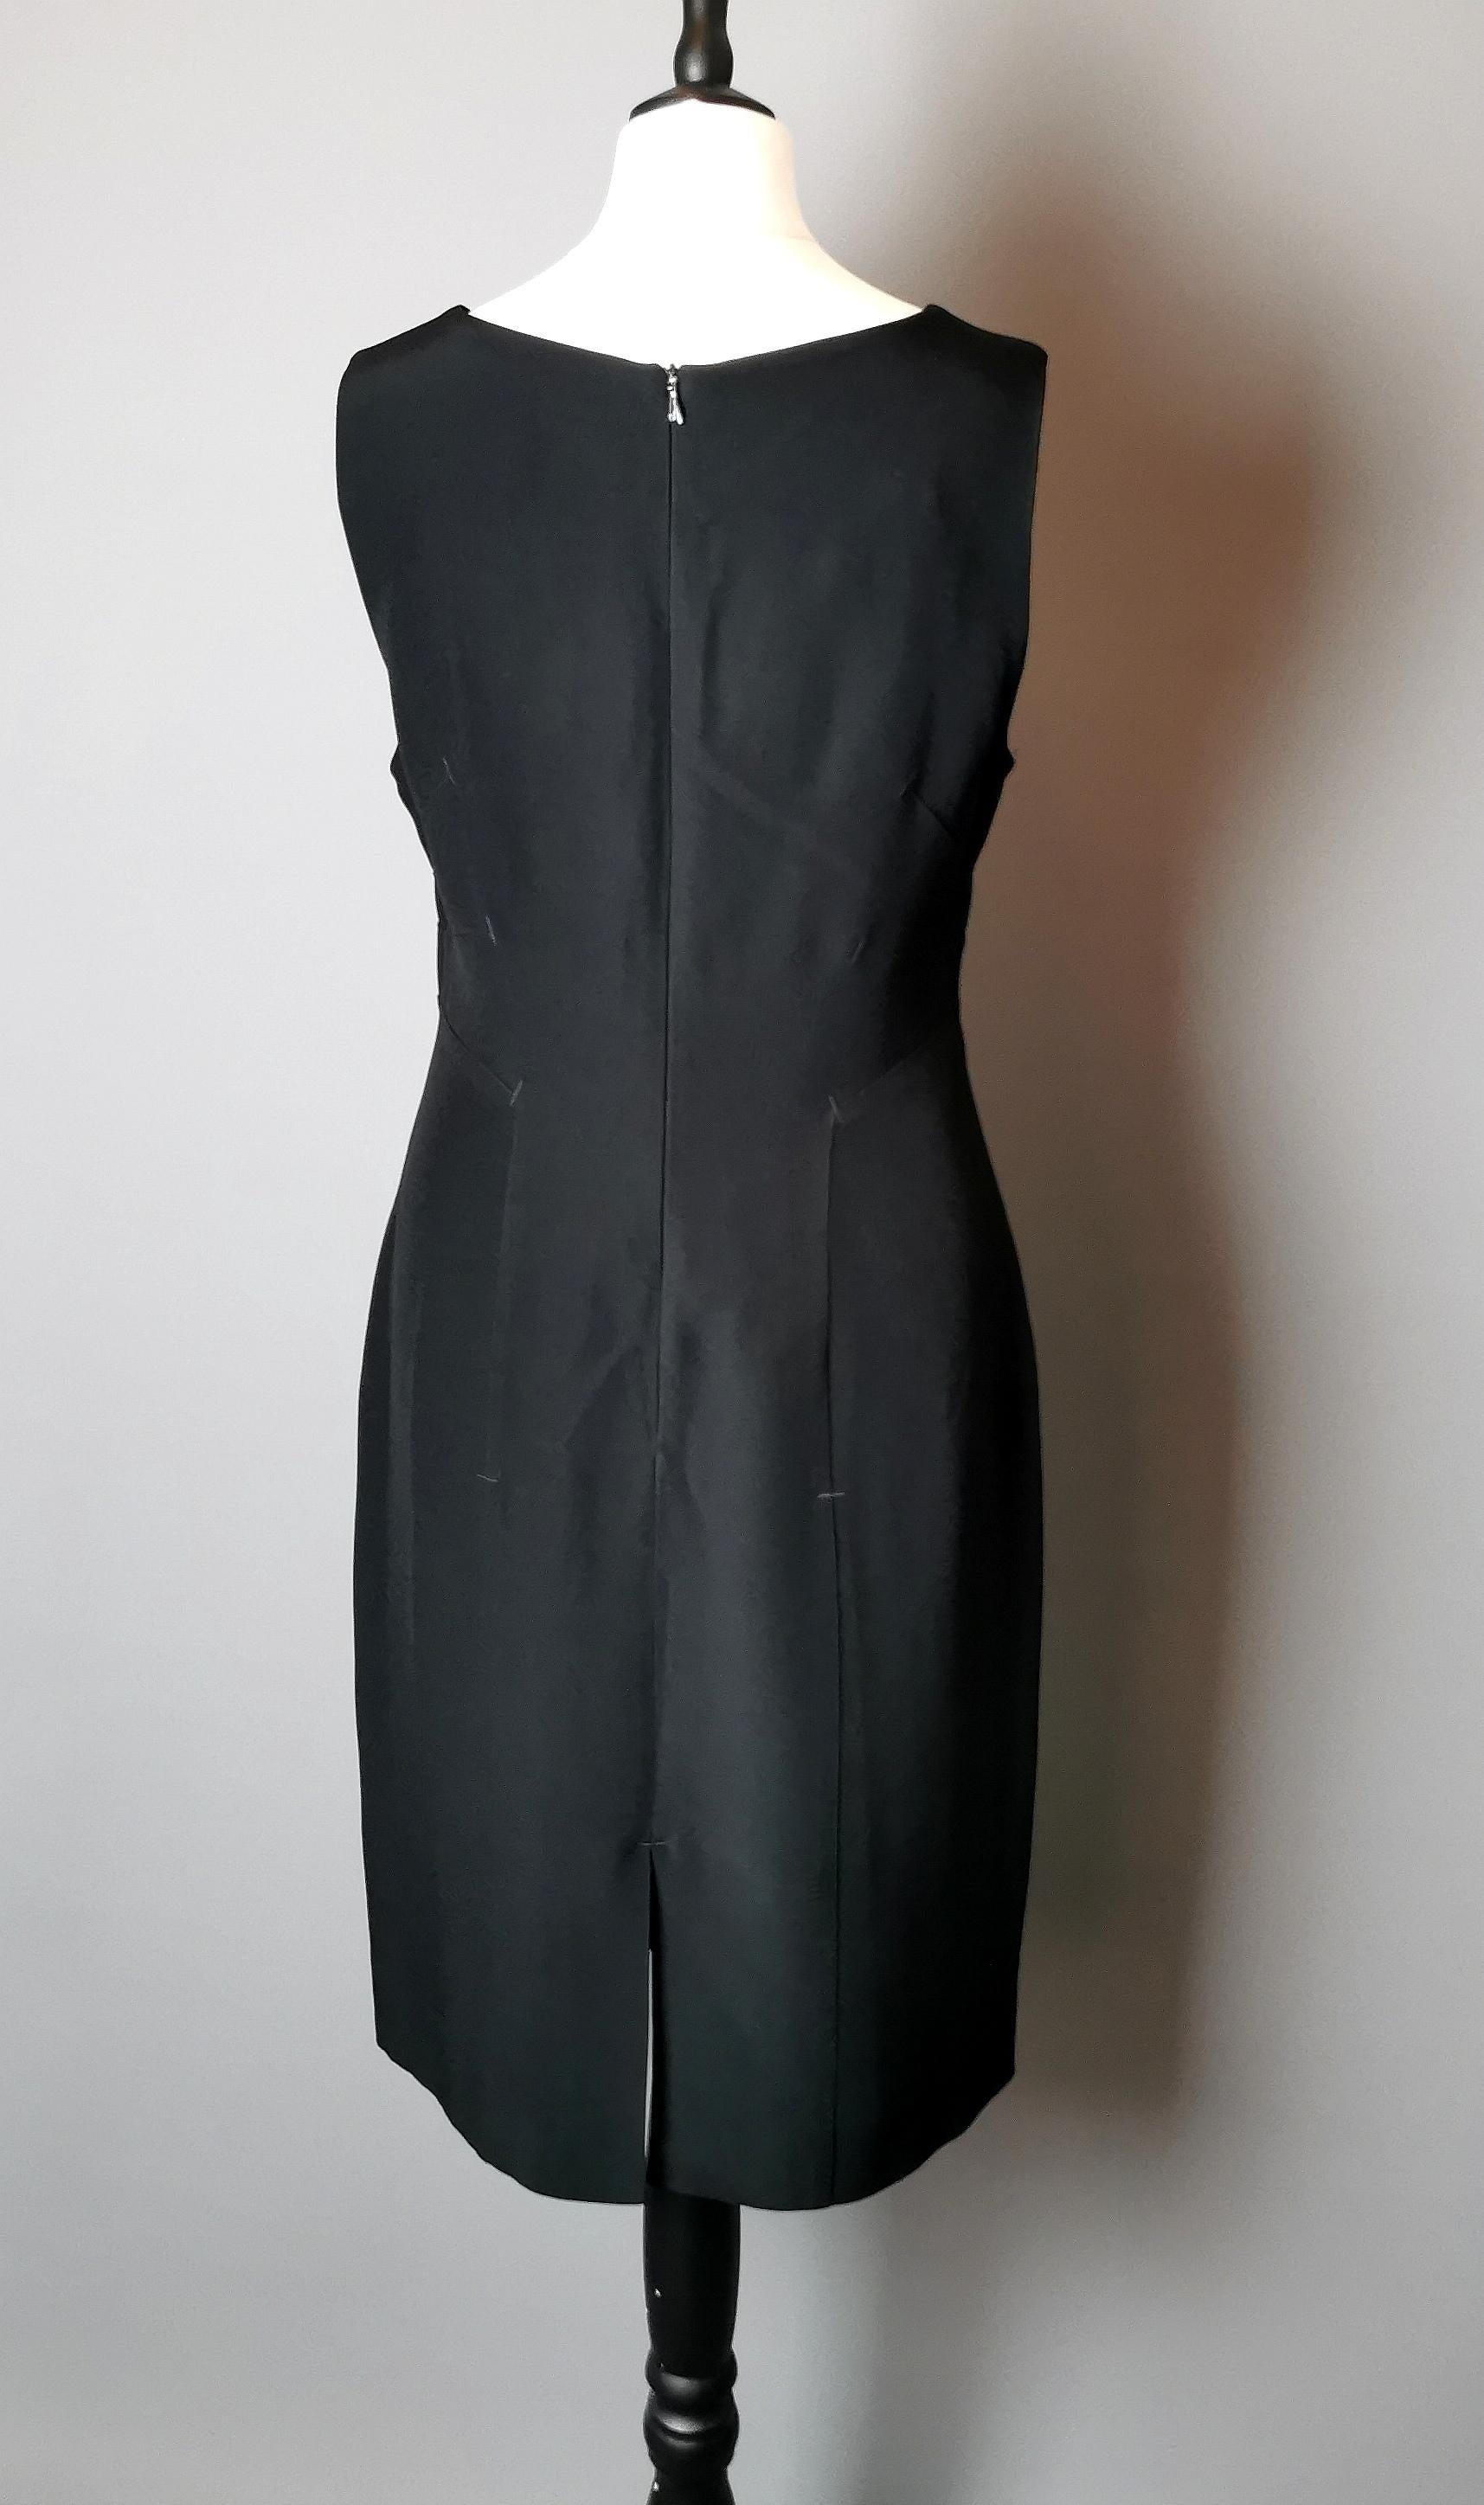 Moschino Cheap and Chic black sheath dress For Sale 5